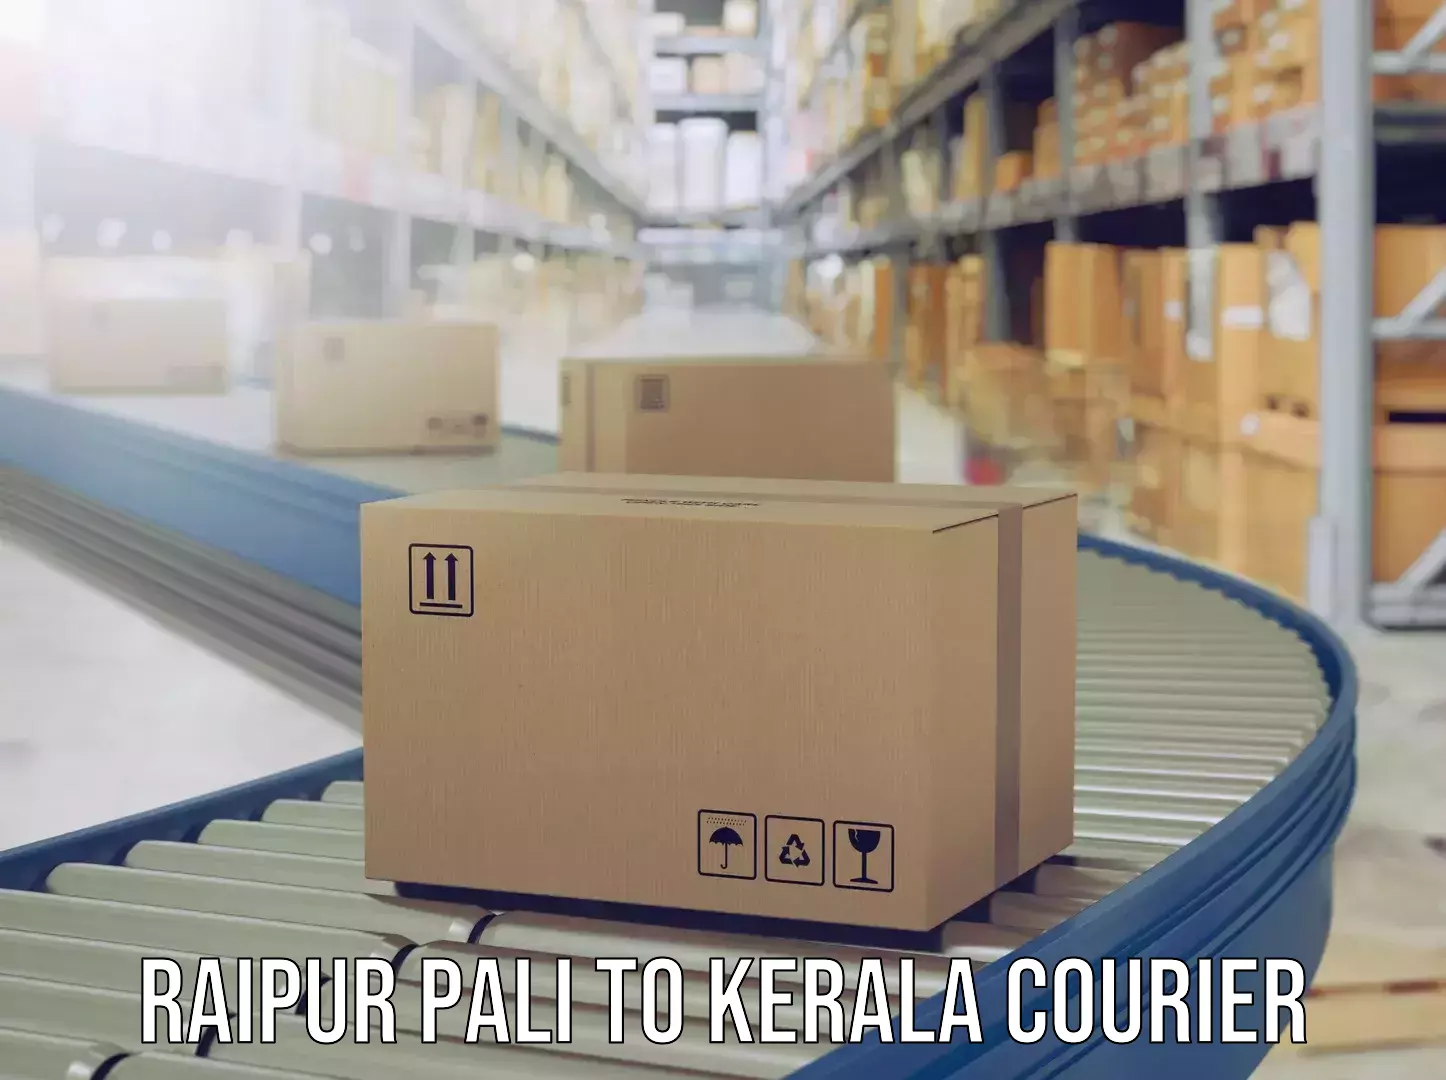 Instant baggage transport quote Raipur Pali to Puthukkad